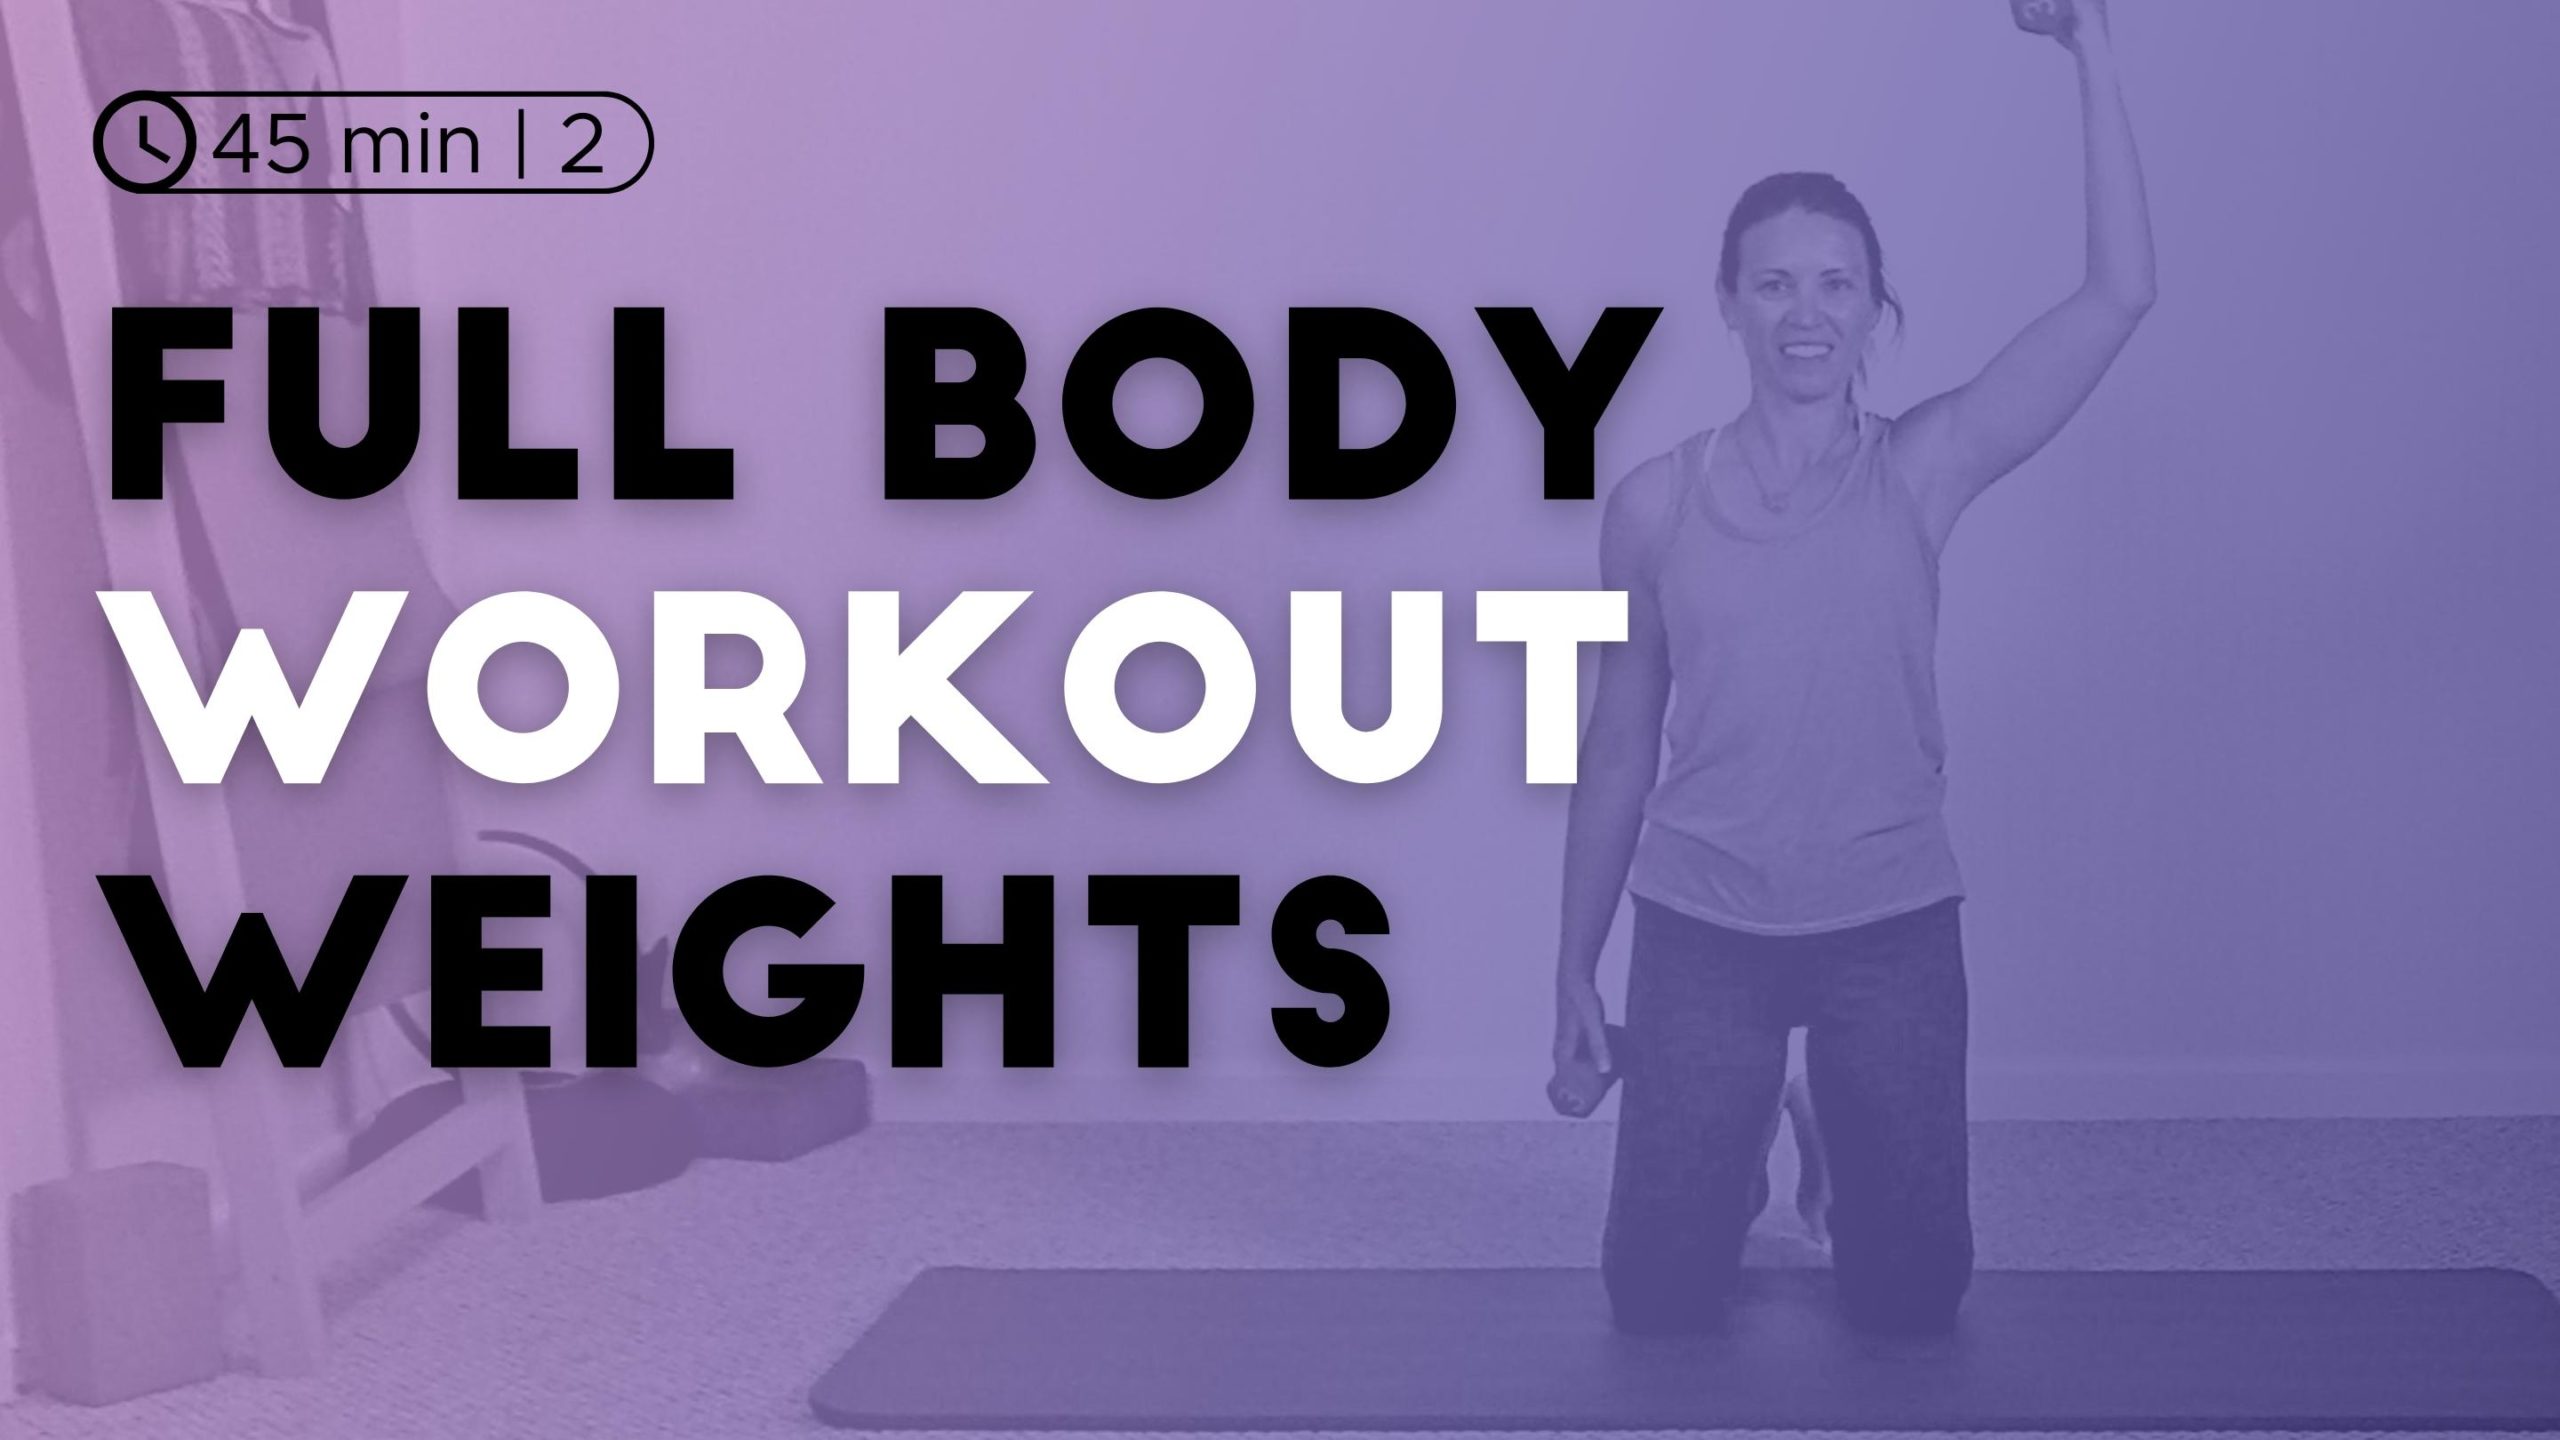 Full Body Workout with Weights